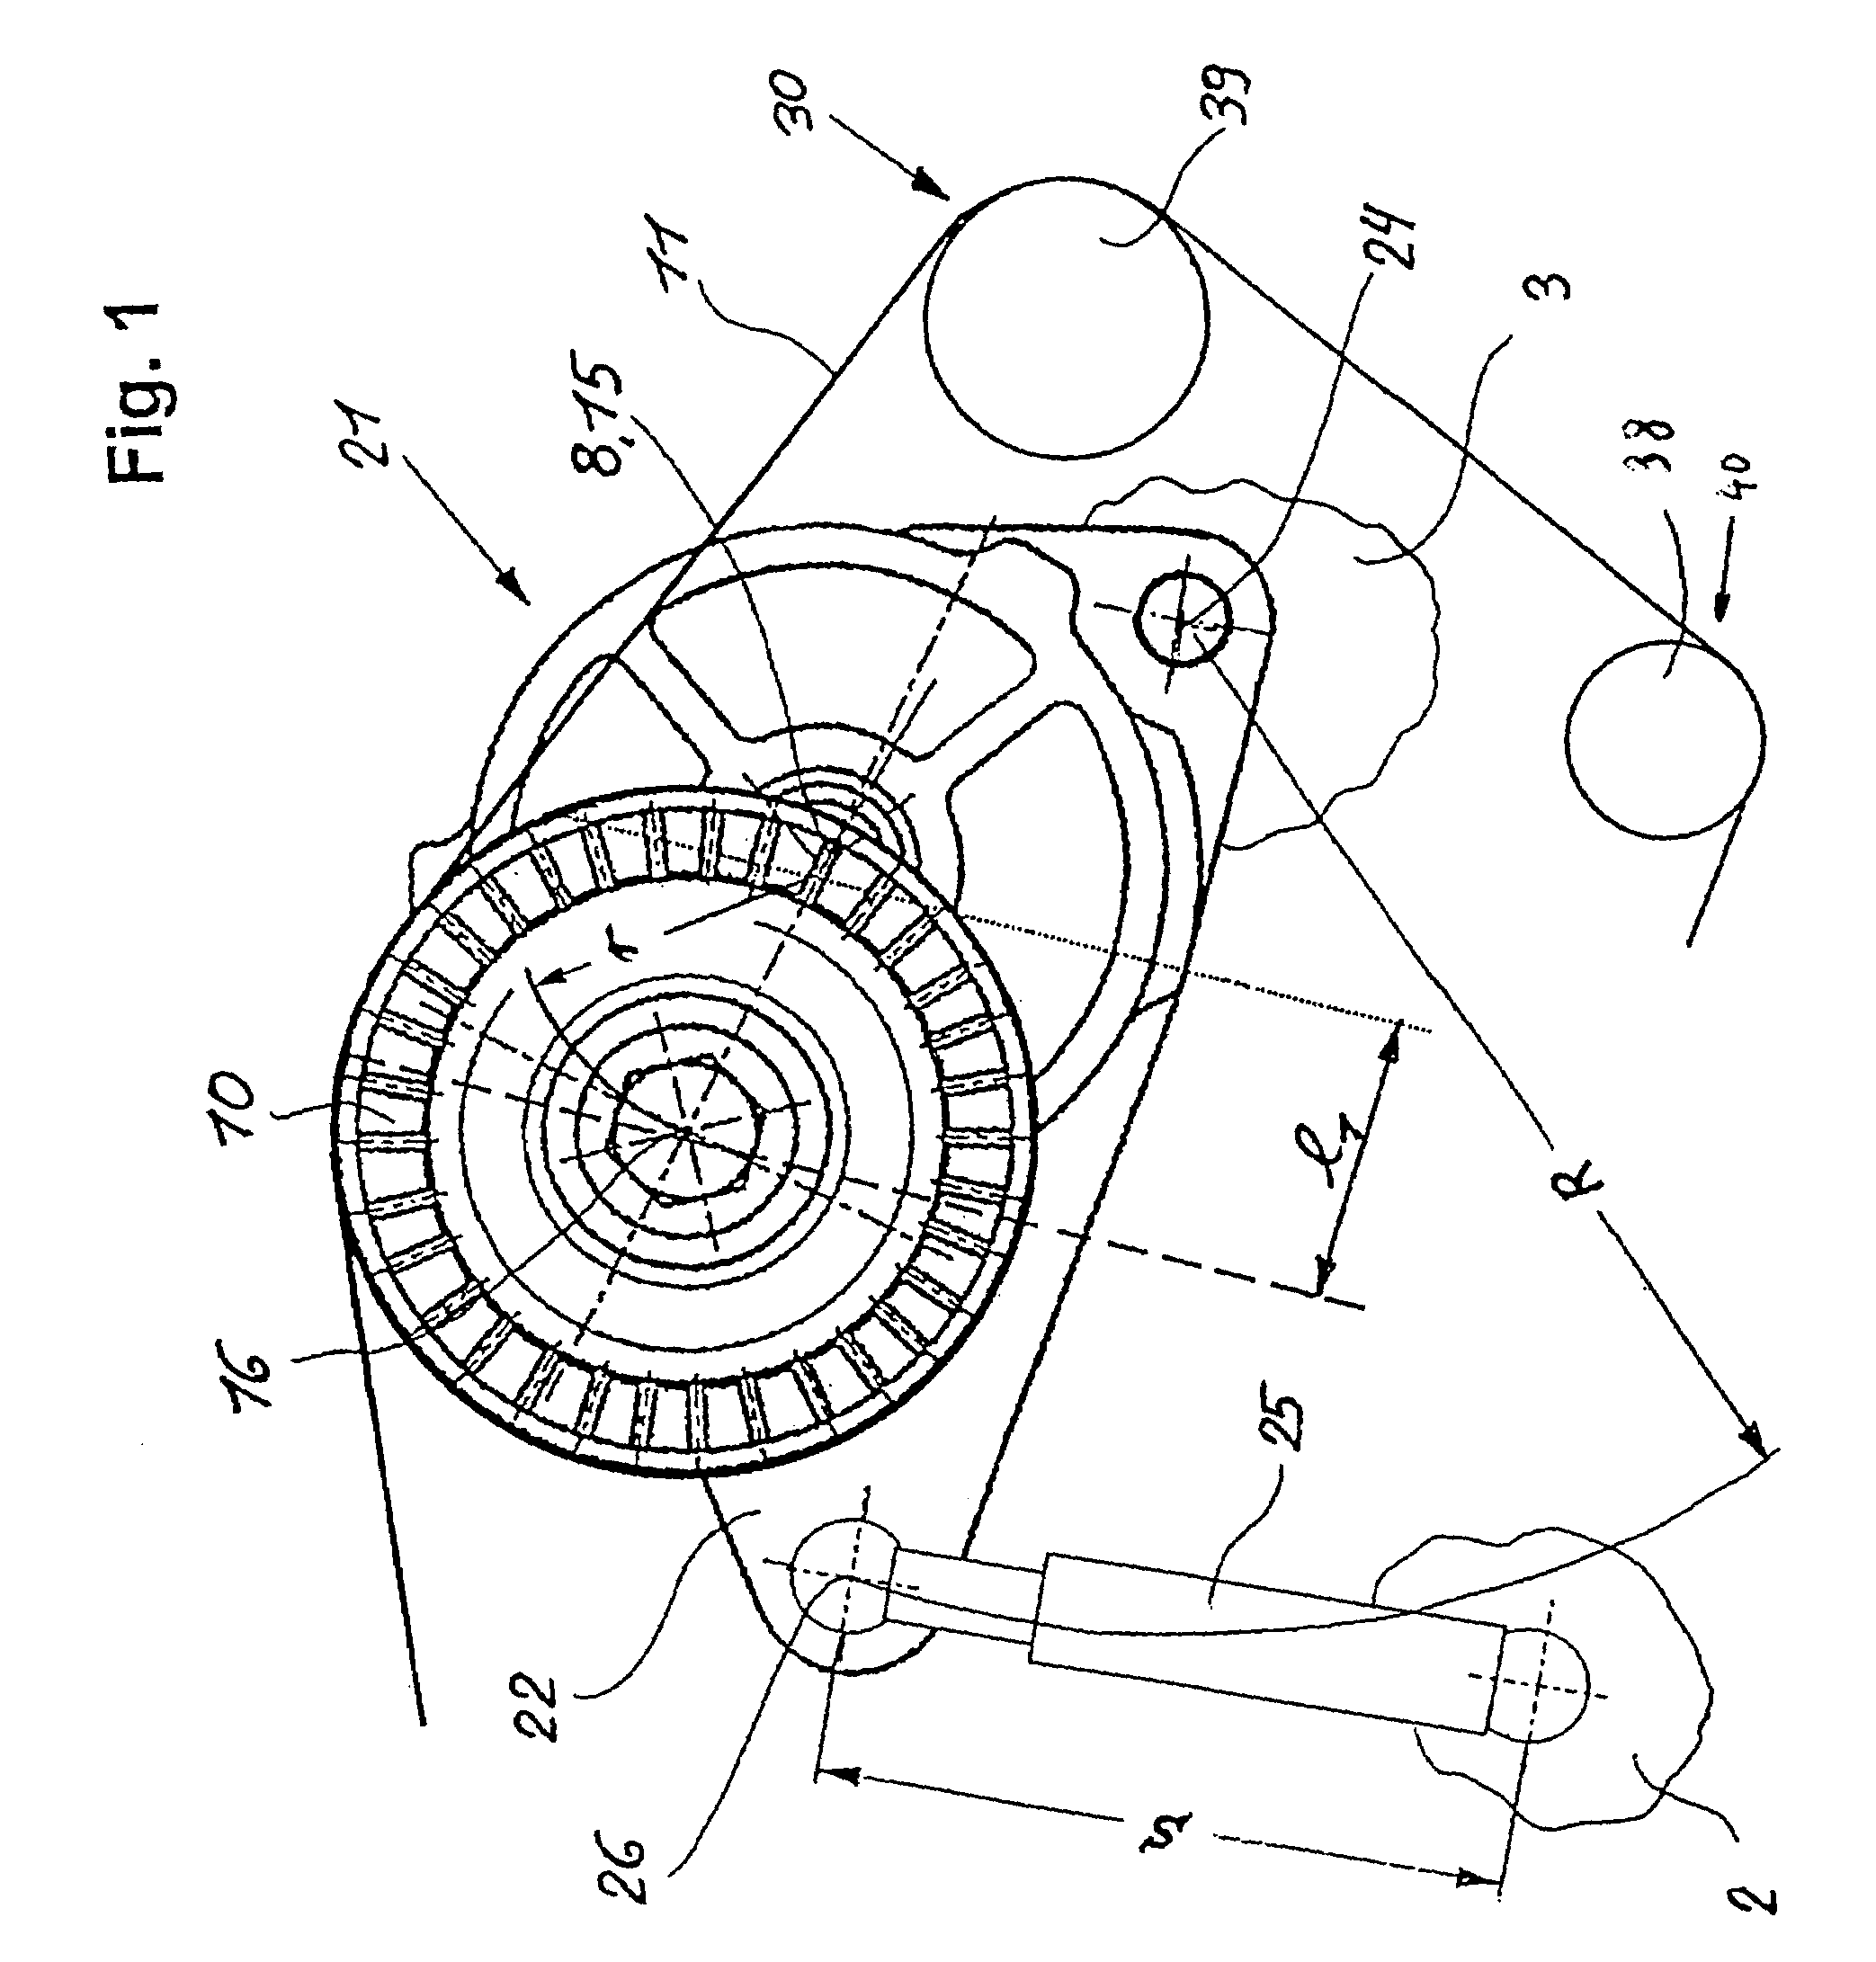 Tensioner with adjustable biasing force of a traction member